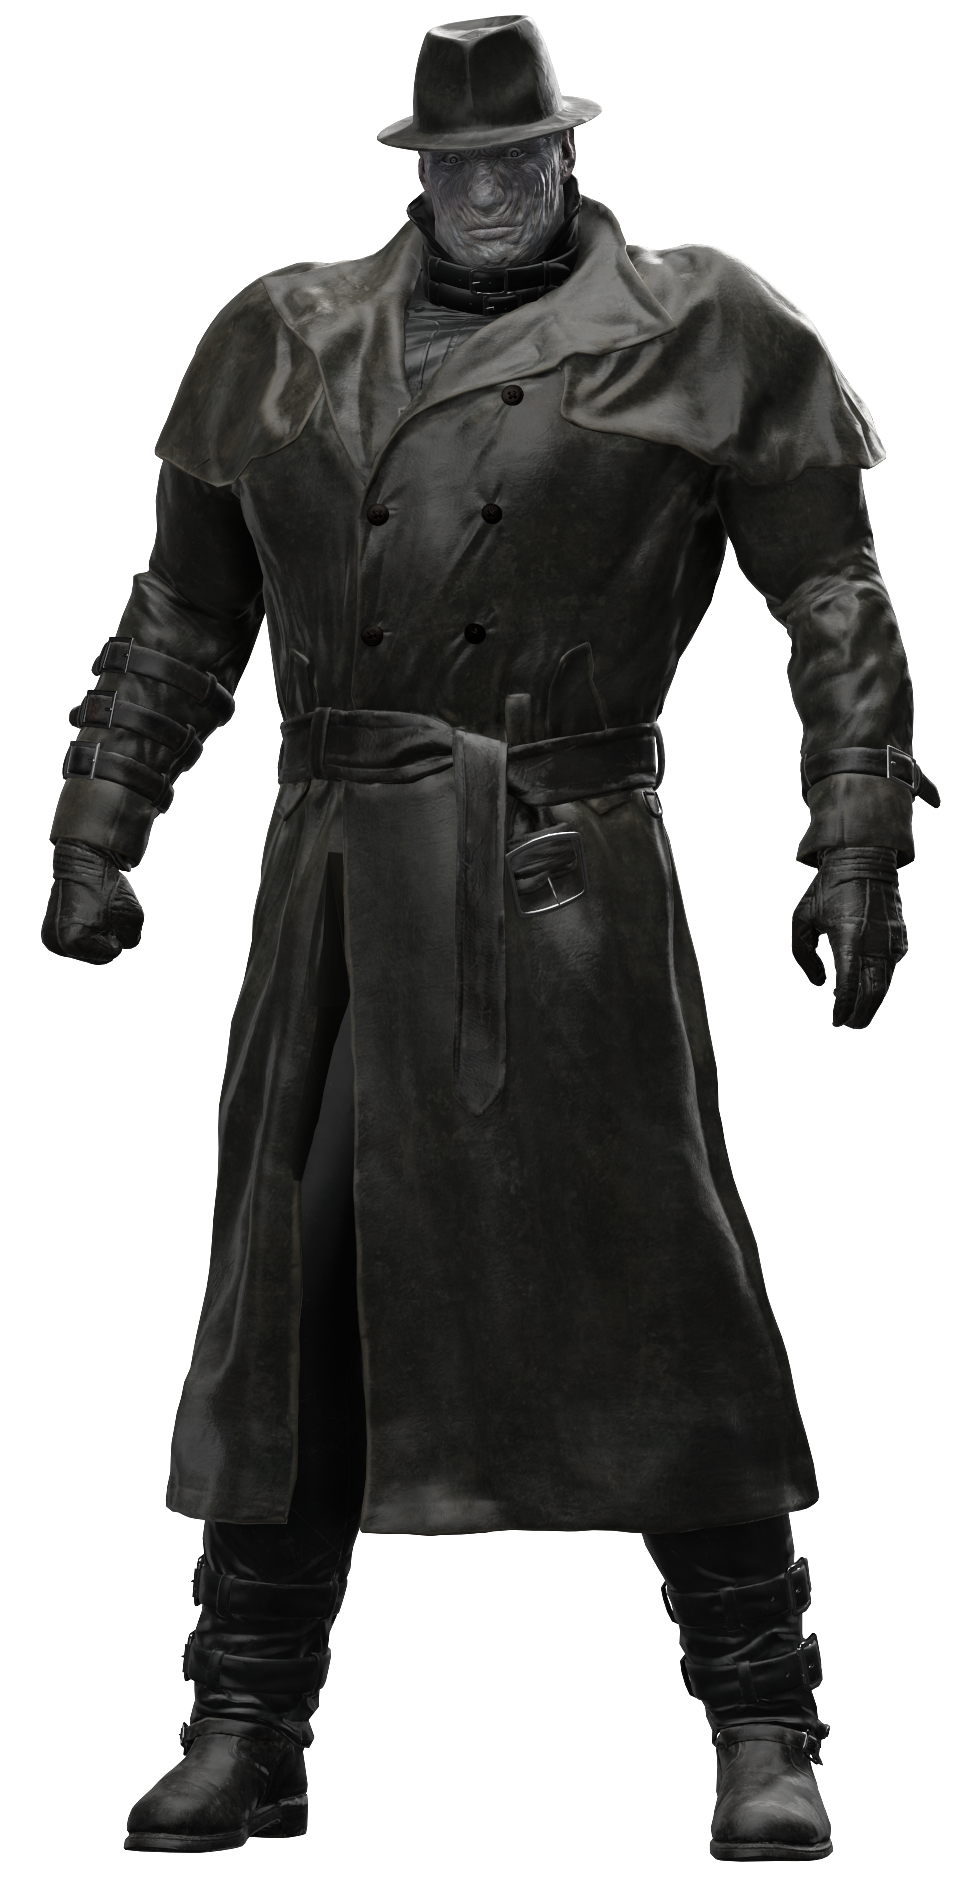 If you think Mr. X has you scared now, just wait : r/residentevil